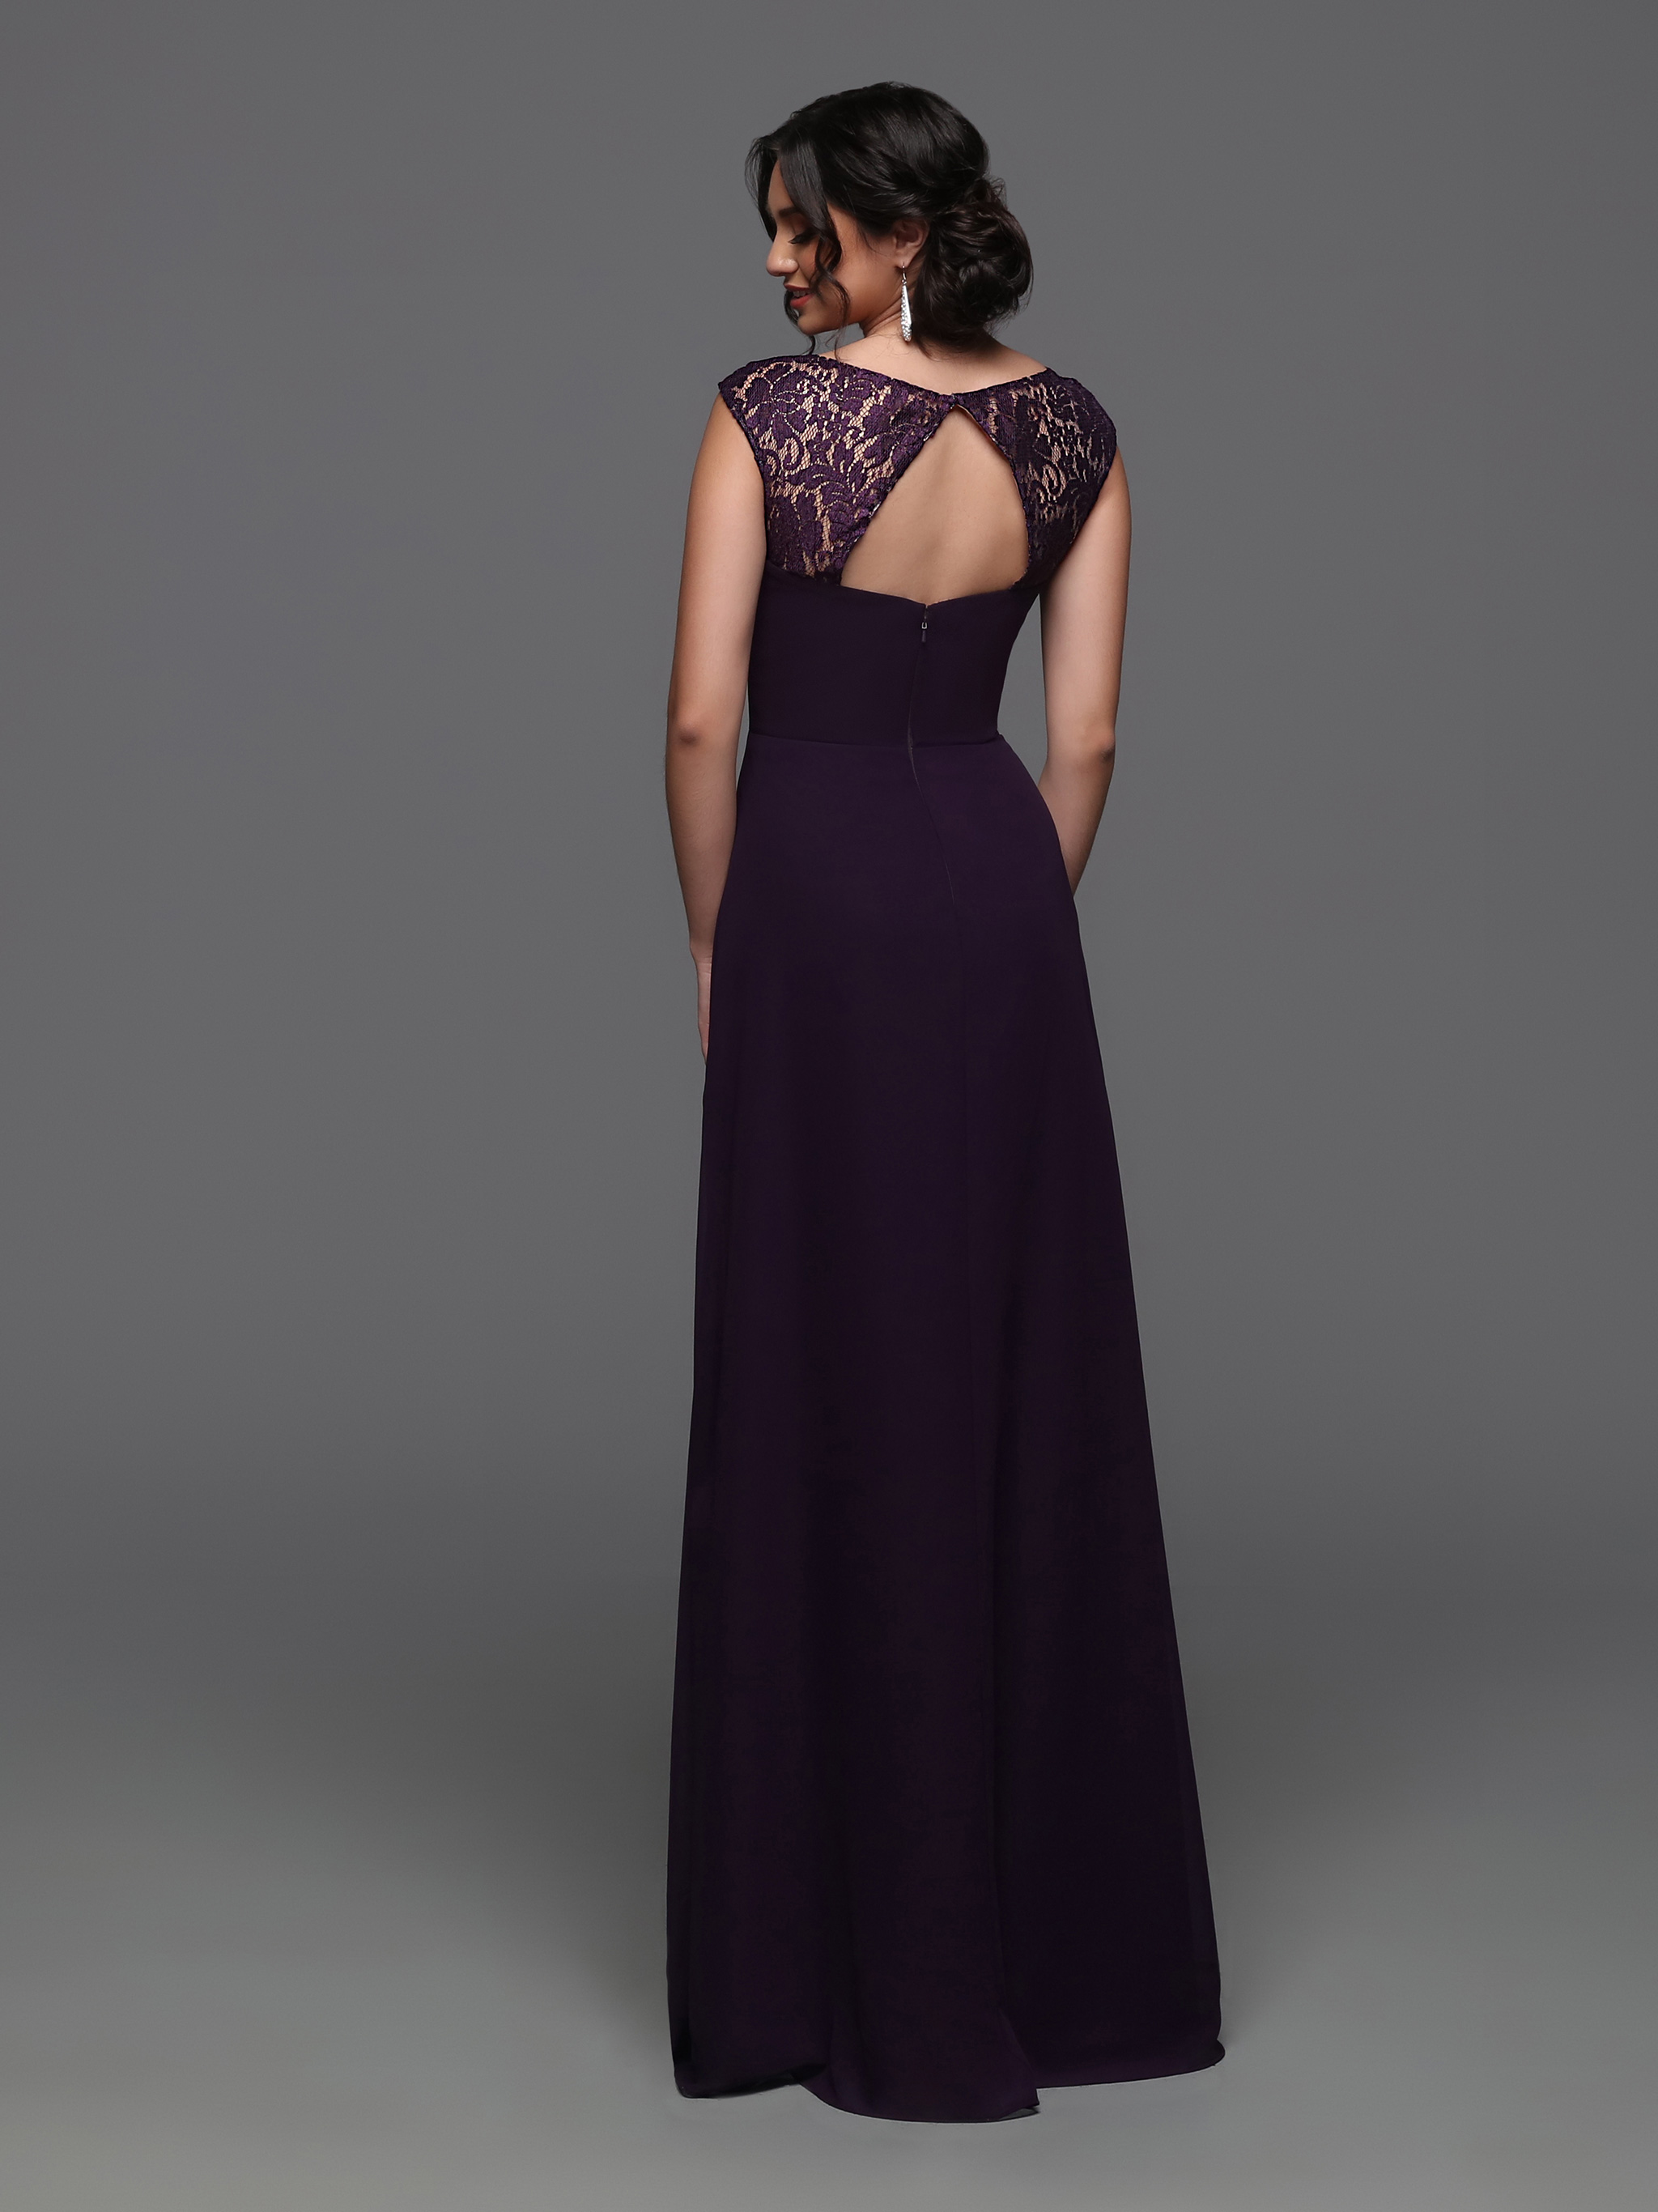 Image showing back view of style #60603